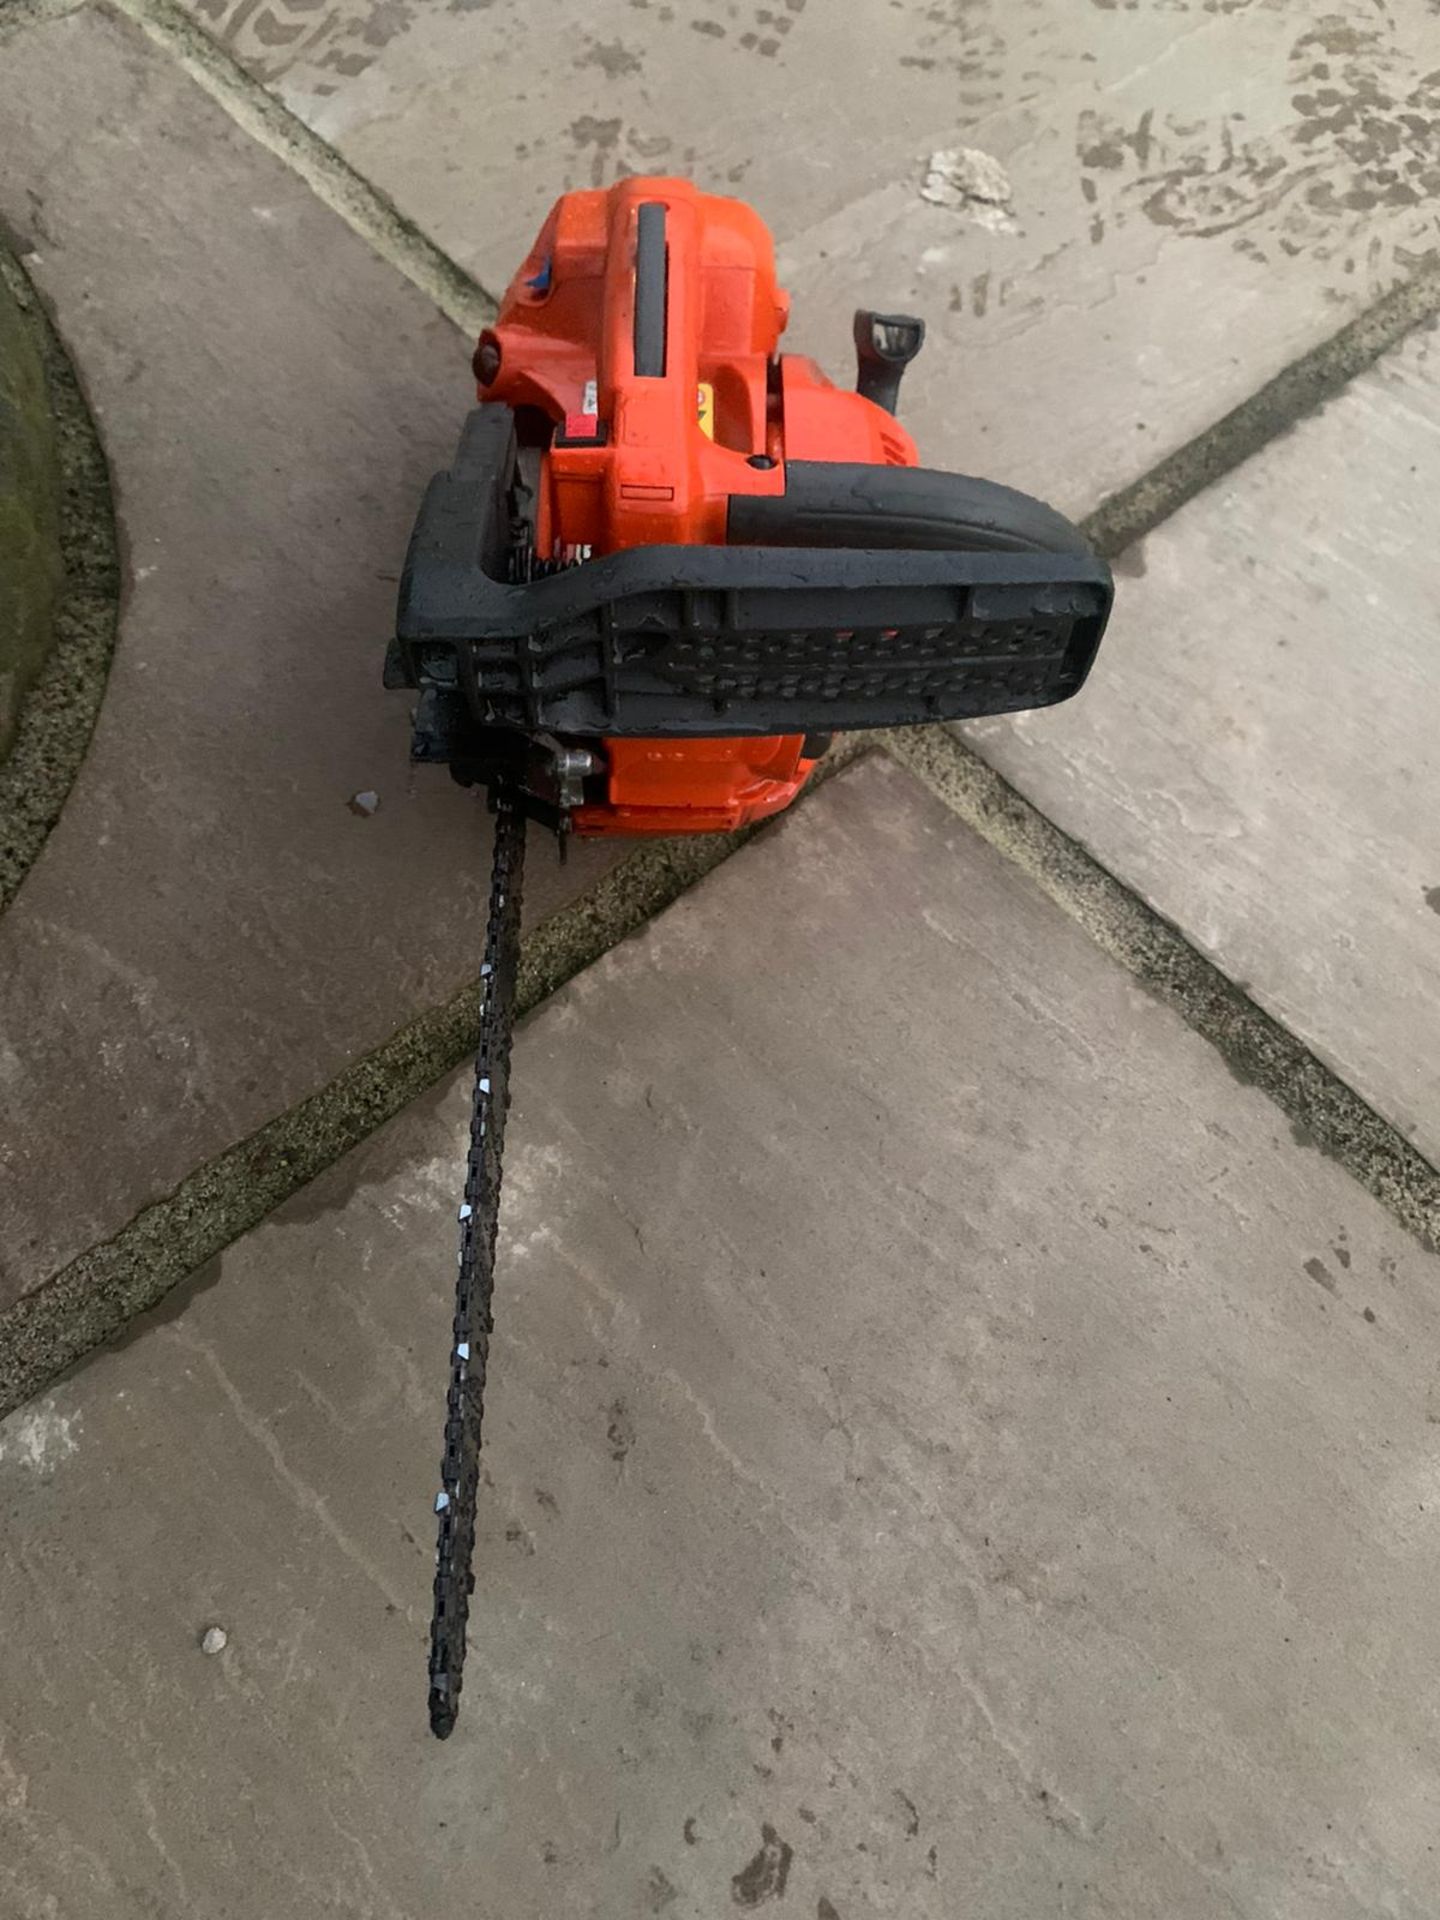 HUSQUVARNA T435 TOP HANDLE CHAINSAW, RUNS AND WORKS, GOOD CONDITION, C/W 12" BAR & CHAIN, 12" COVER - Image 2 of 4